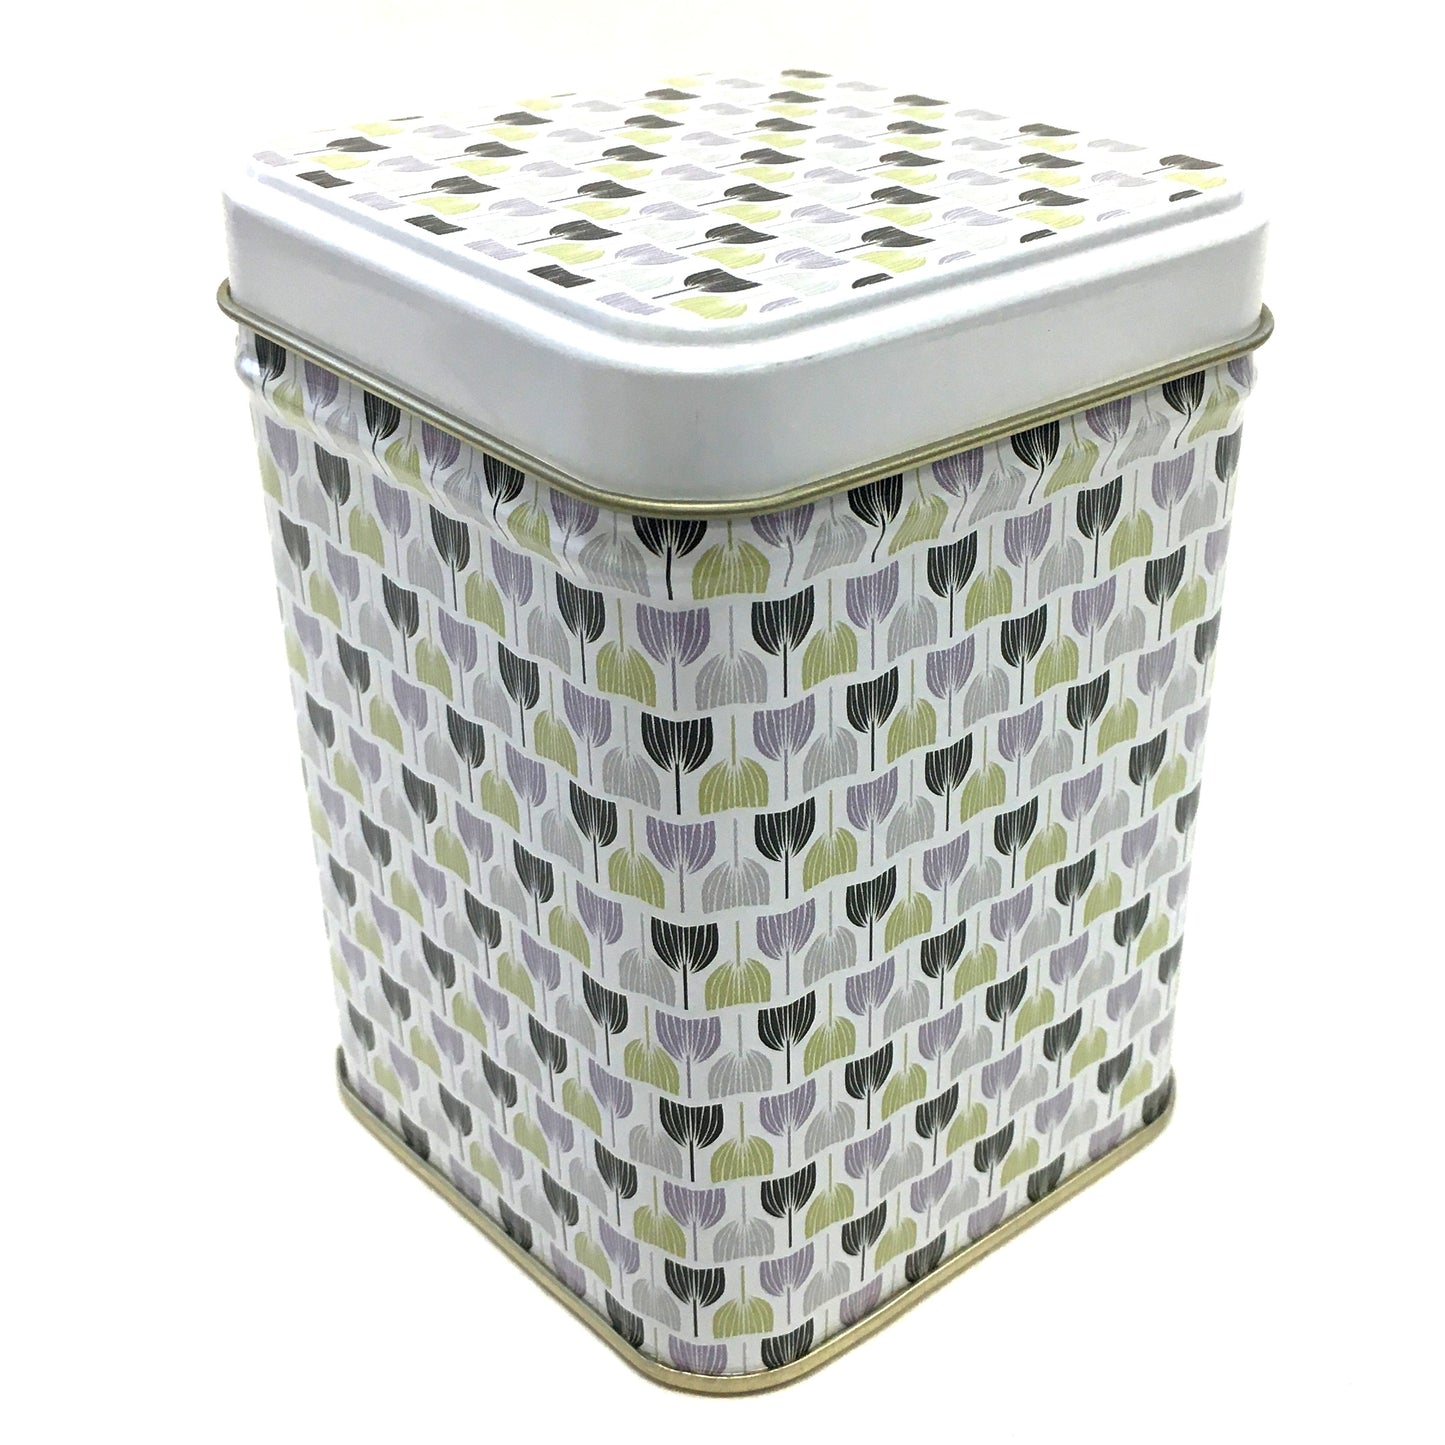 CANISTER WITH TULIP PATTERN APPROX. 4 OZ CAPACITY